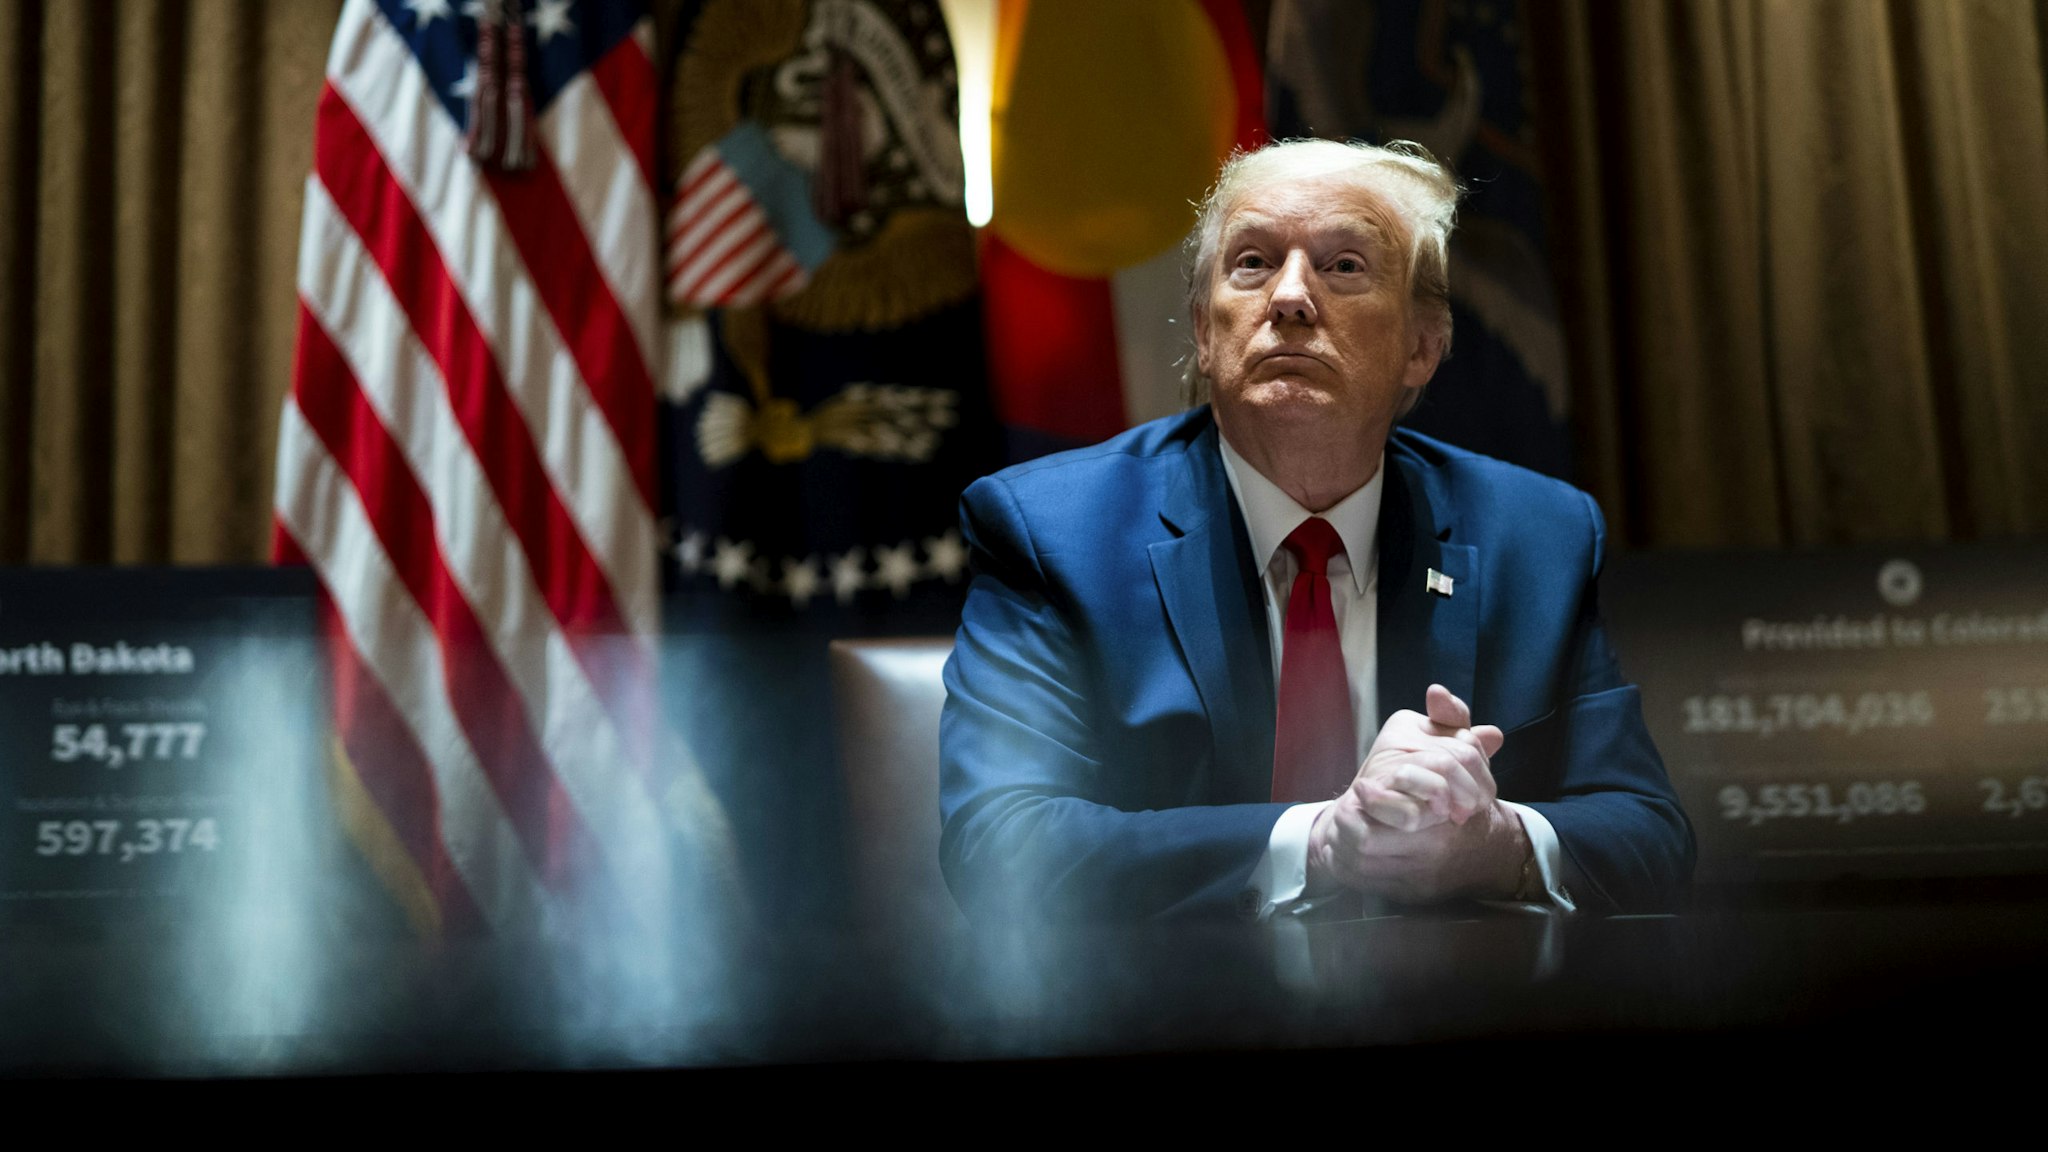 WASHINGTON, DC - MAY 13: U.S. President Donald Trump looks on he as meets with Colorado Governor Jared Polis and North Dakota Governor Doug Burgum in the Cabinet Room of the White House on May 13, 2020 in Washington, DC. (Photo by Doug Mills-Pool/Getty Images)